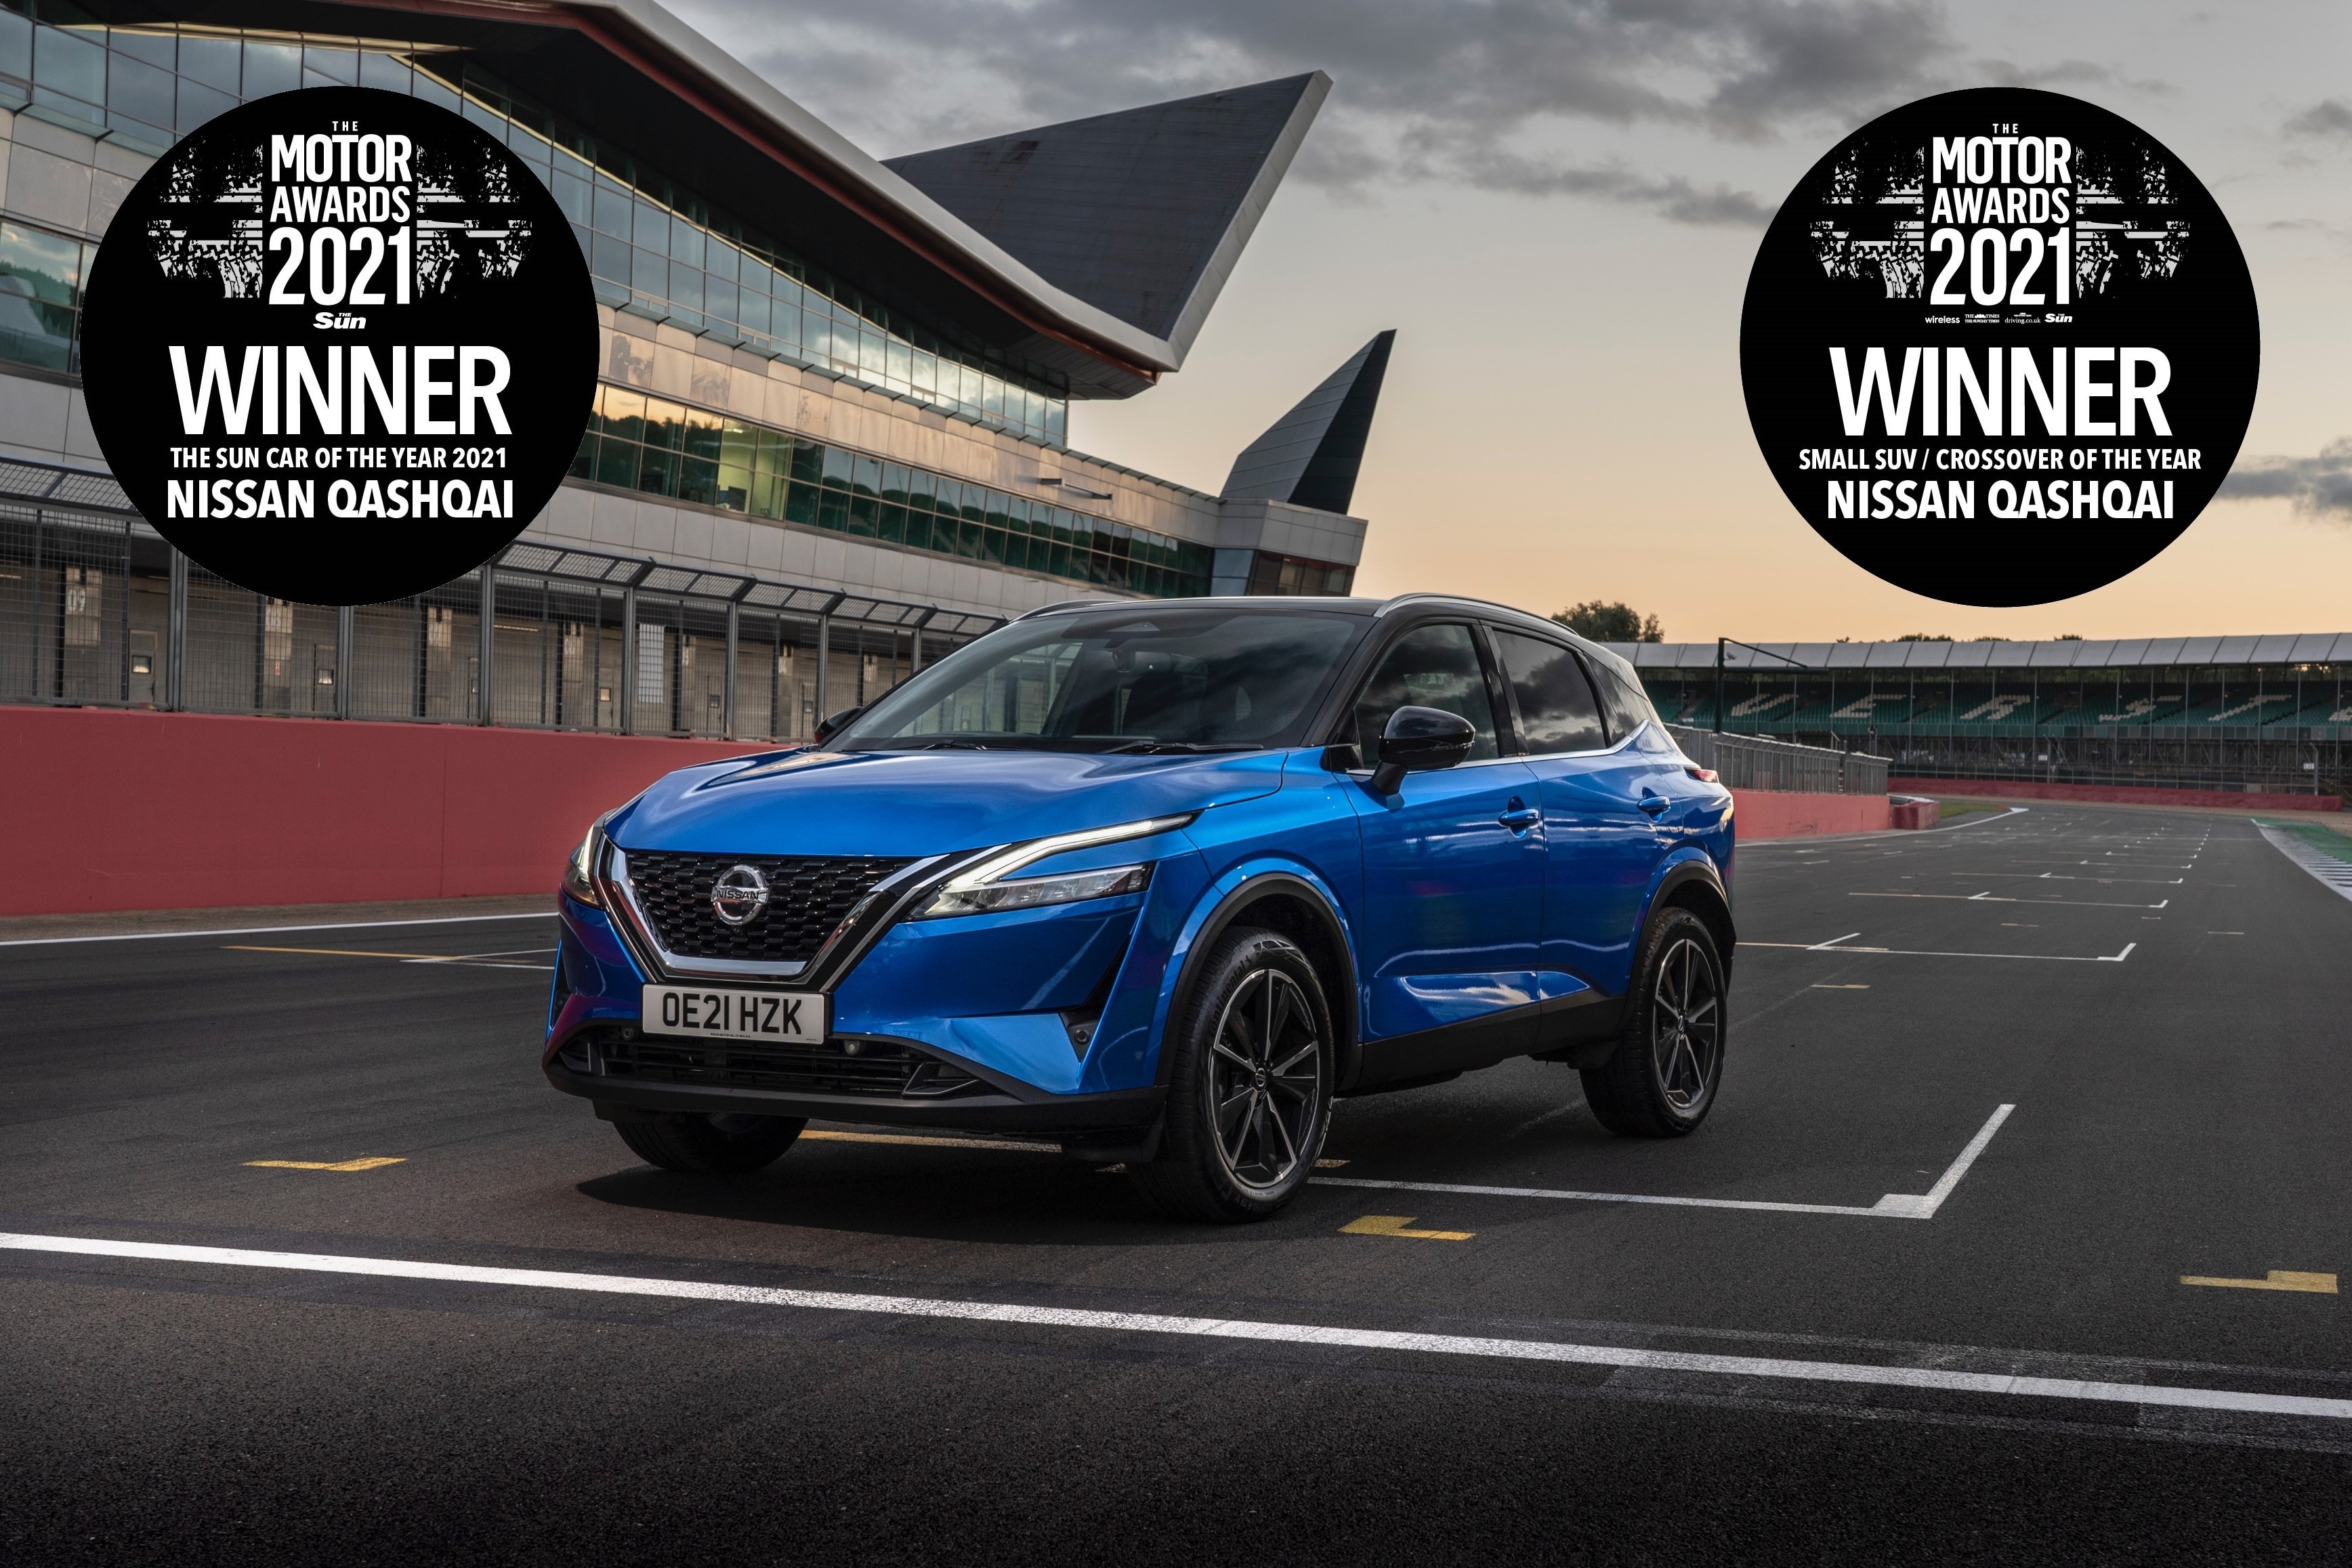 Best of British! An electrified double victory for the All-New Nissan Qashqai at The Motor Awards 2021